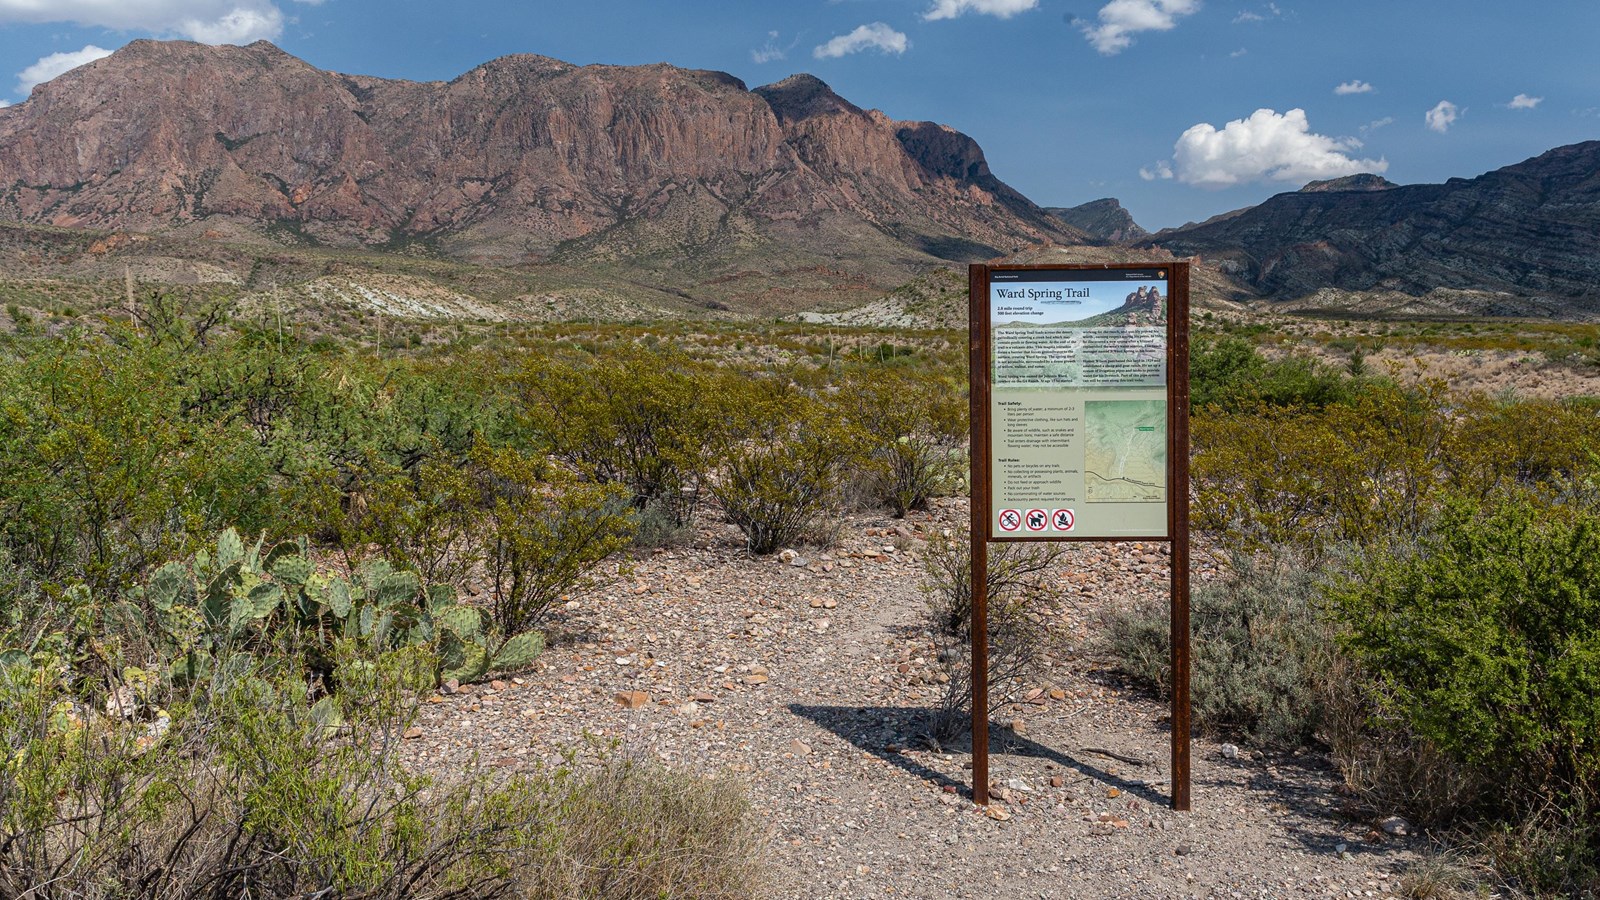 A sign with information about the Ward Spring Trail marks the beginning of the trail.